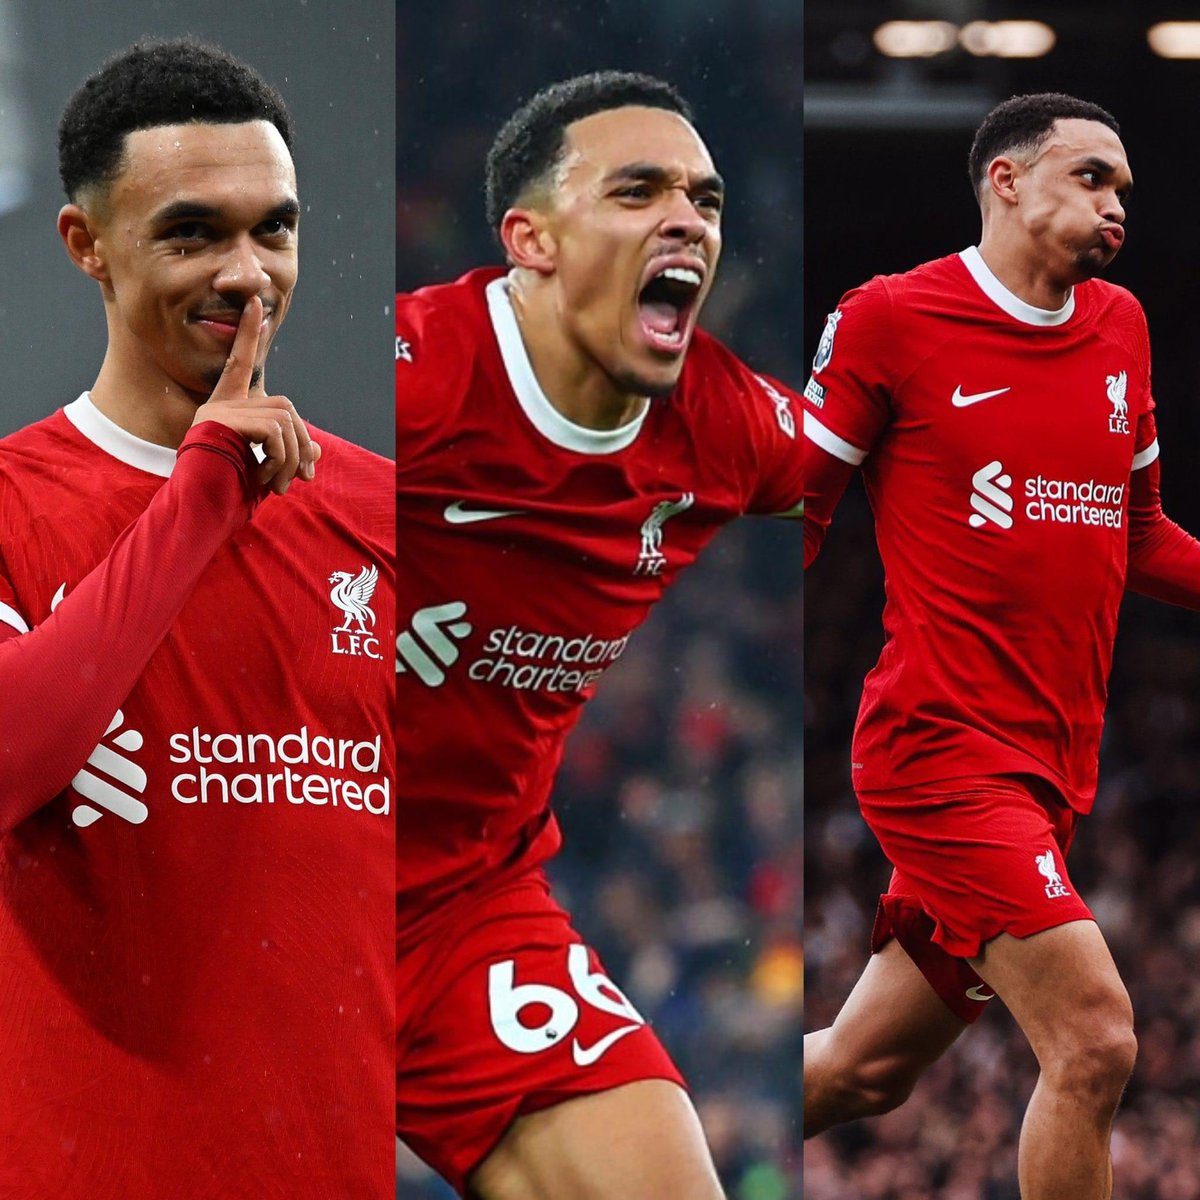 Most direct free-kicks scored for Liverpool in the Premier League:

◎ 8 - Jamie Redknapp 
◎ 7 - Steven Gerrard 
◉ 6 - Trent Alexander-Arnold 

TAA has another record in his sights. 🎯